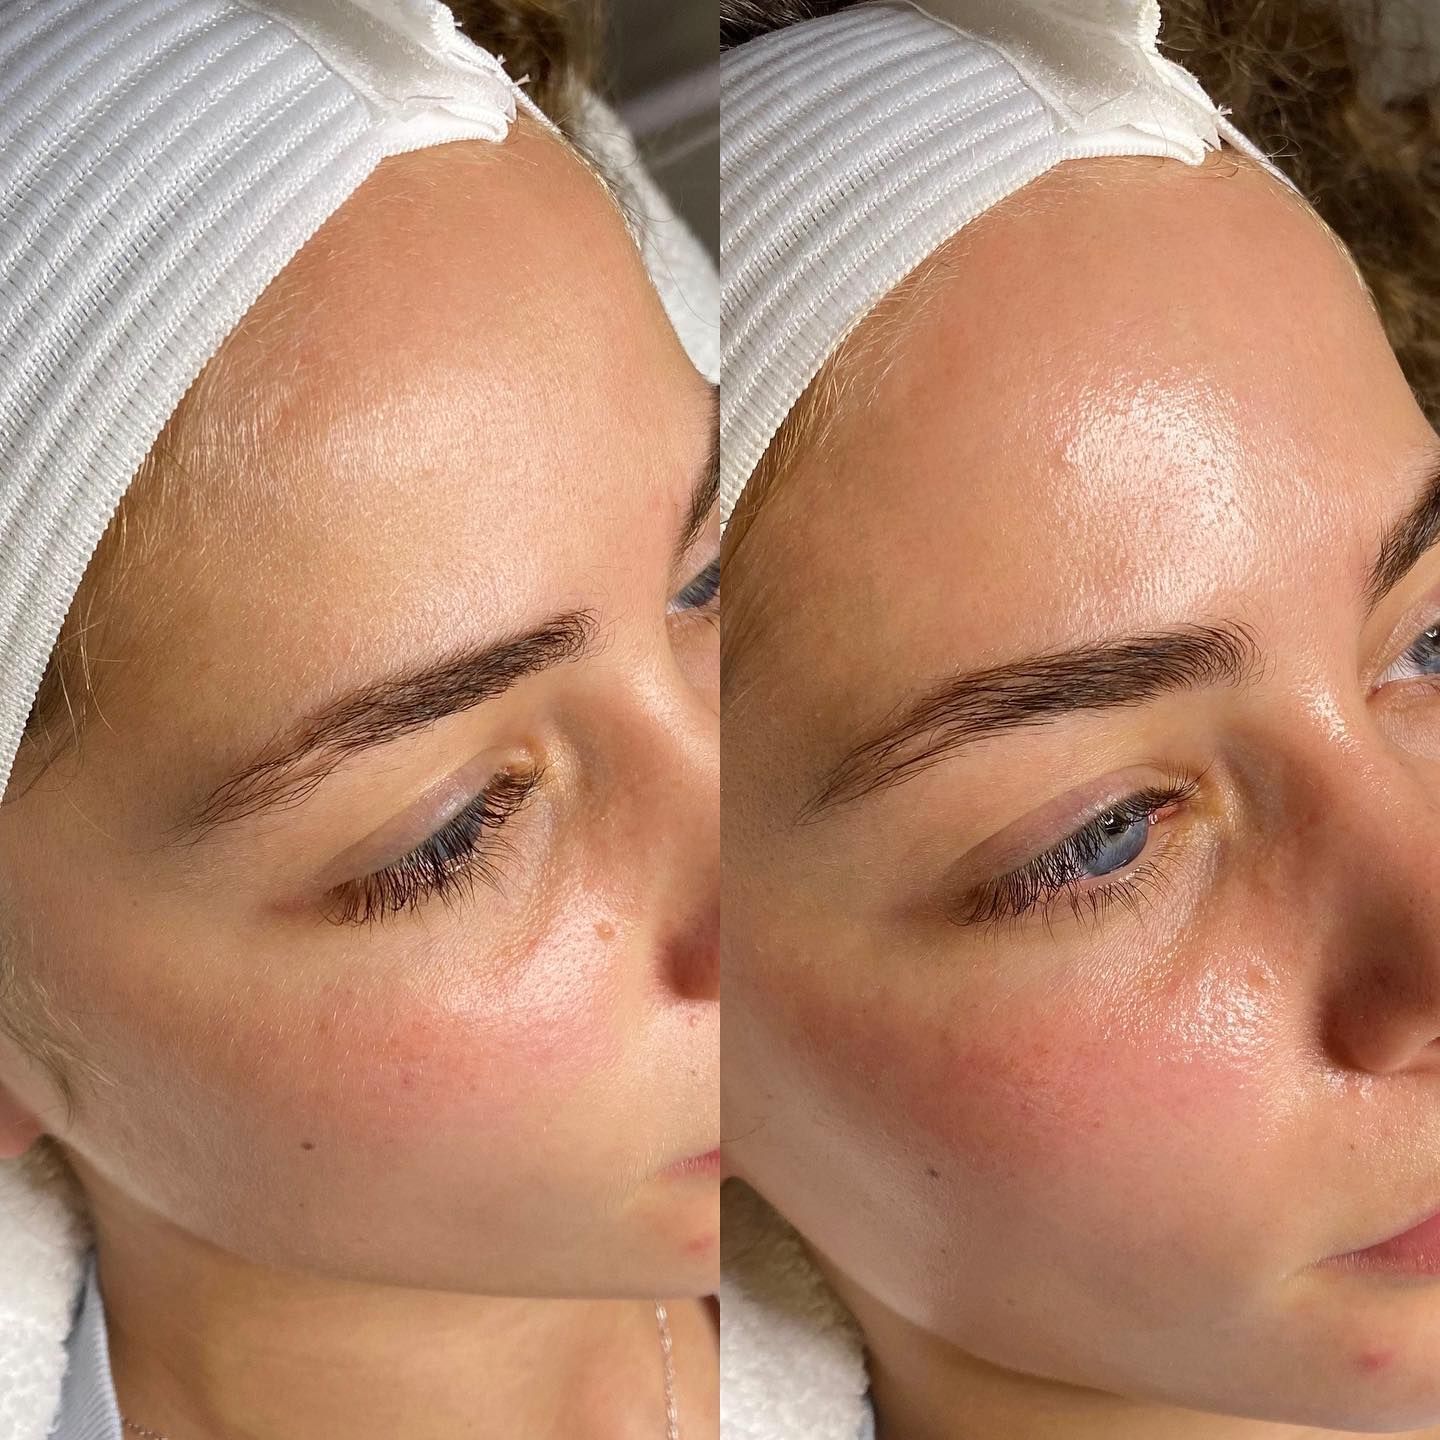 dermaplane facial results - before and after - Woodlands TX